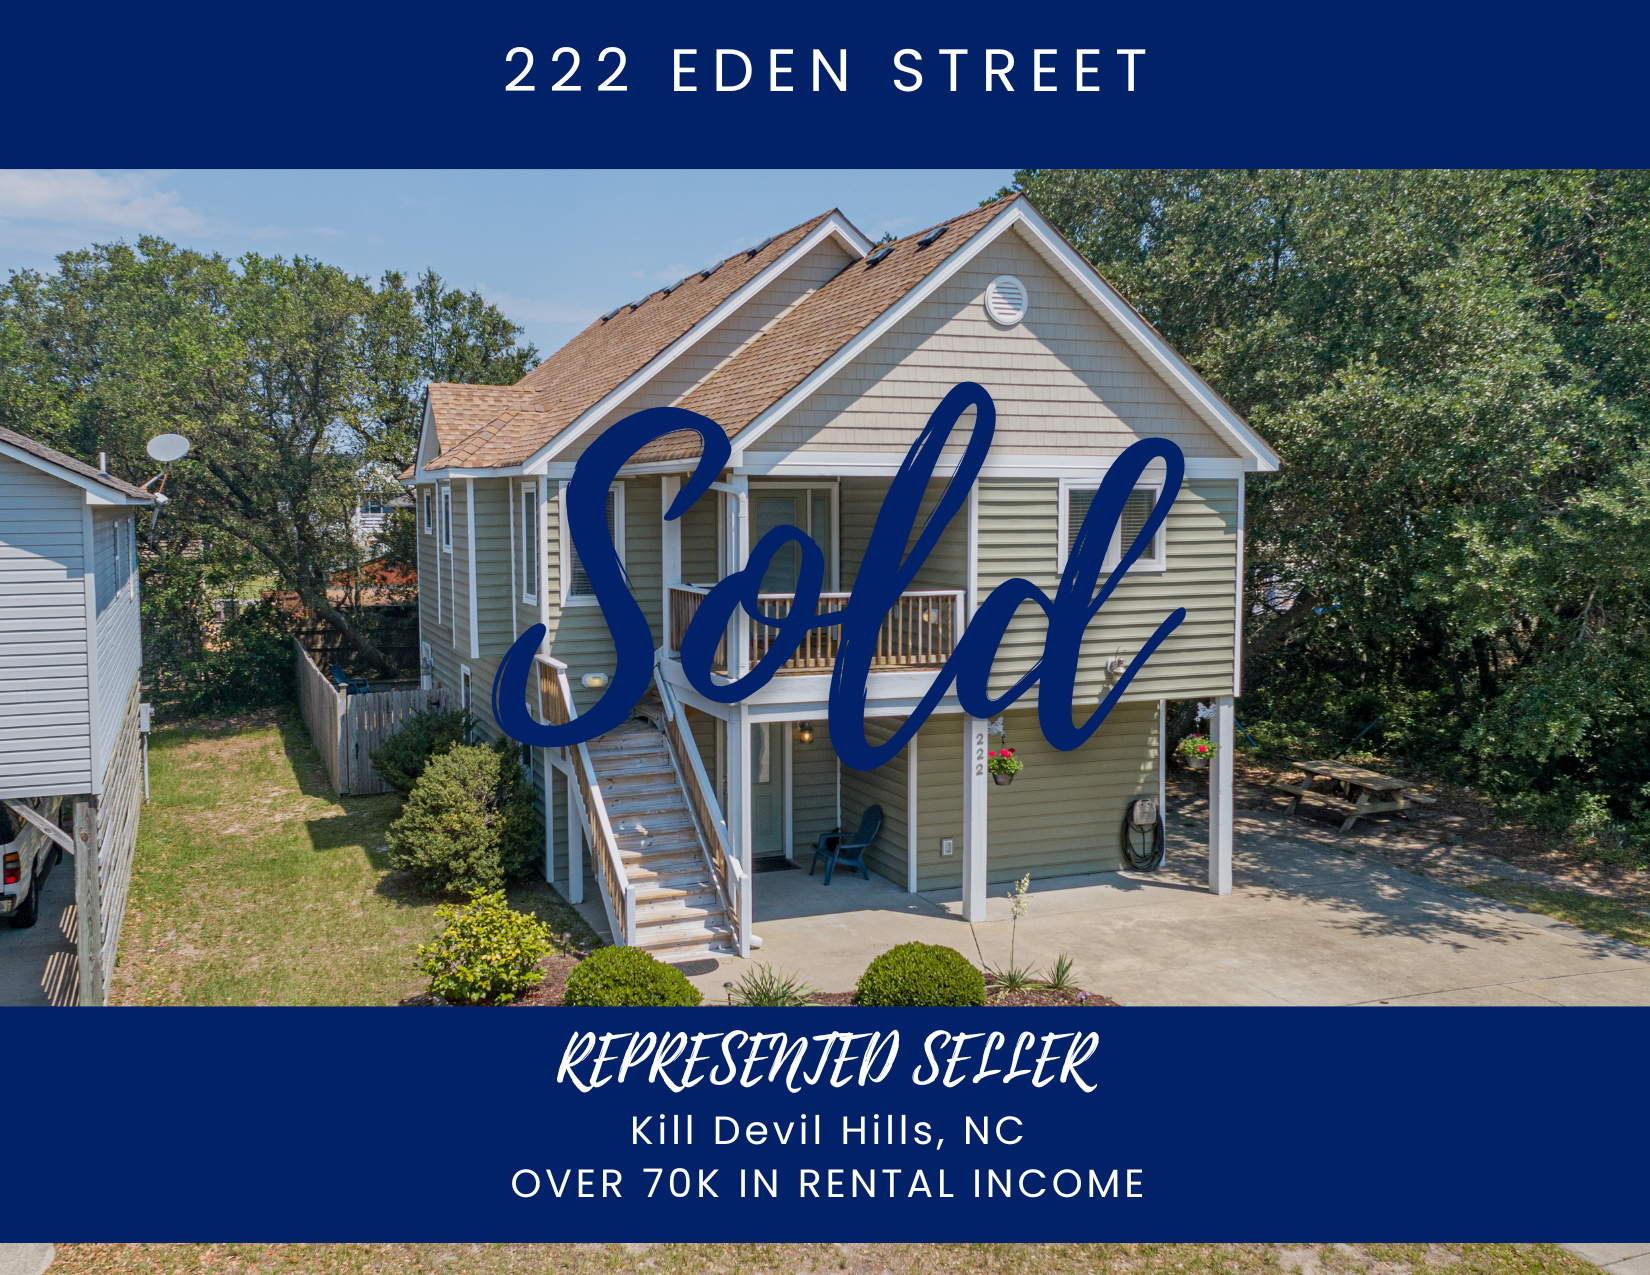 Sold Picture of Outer Banks Vacation Rental Eden Street